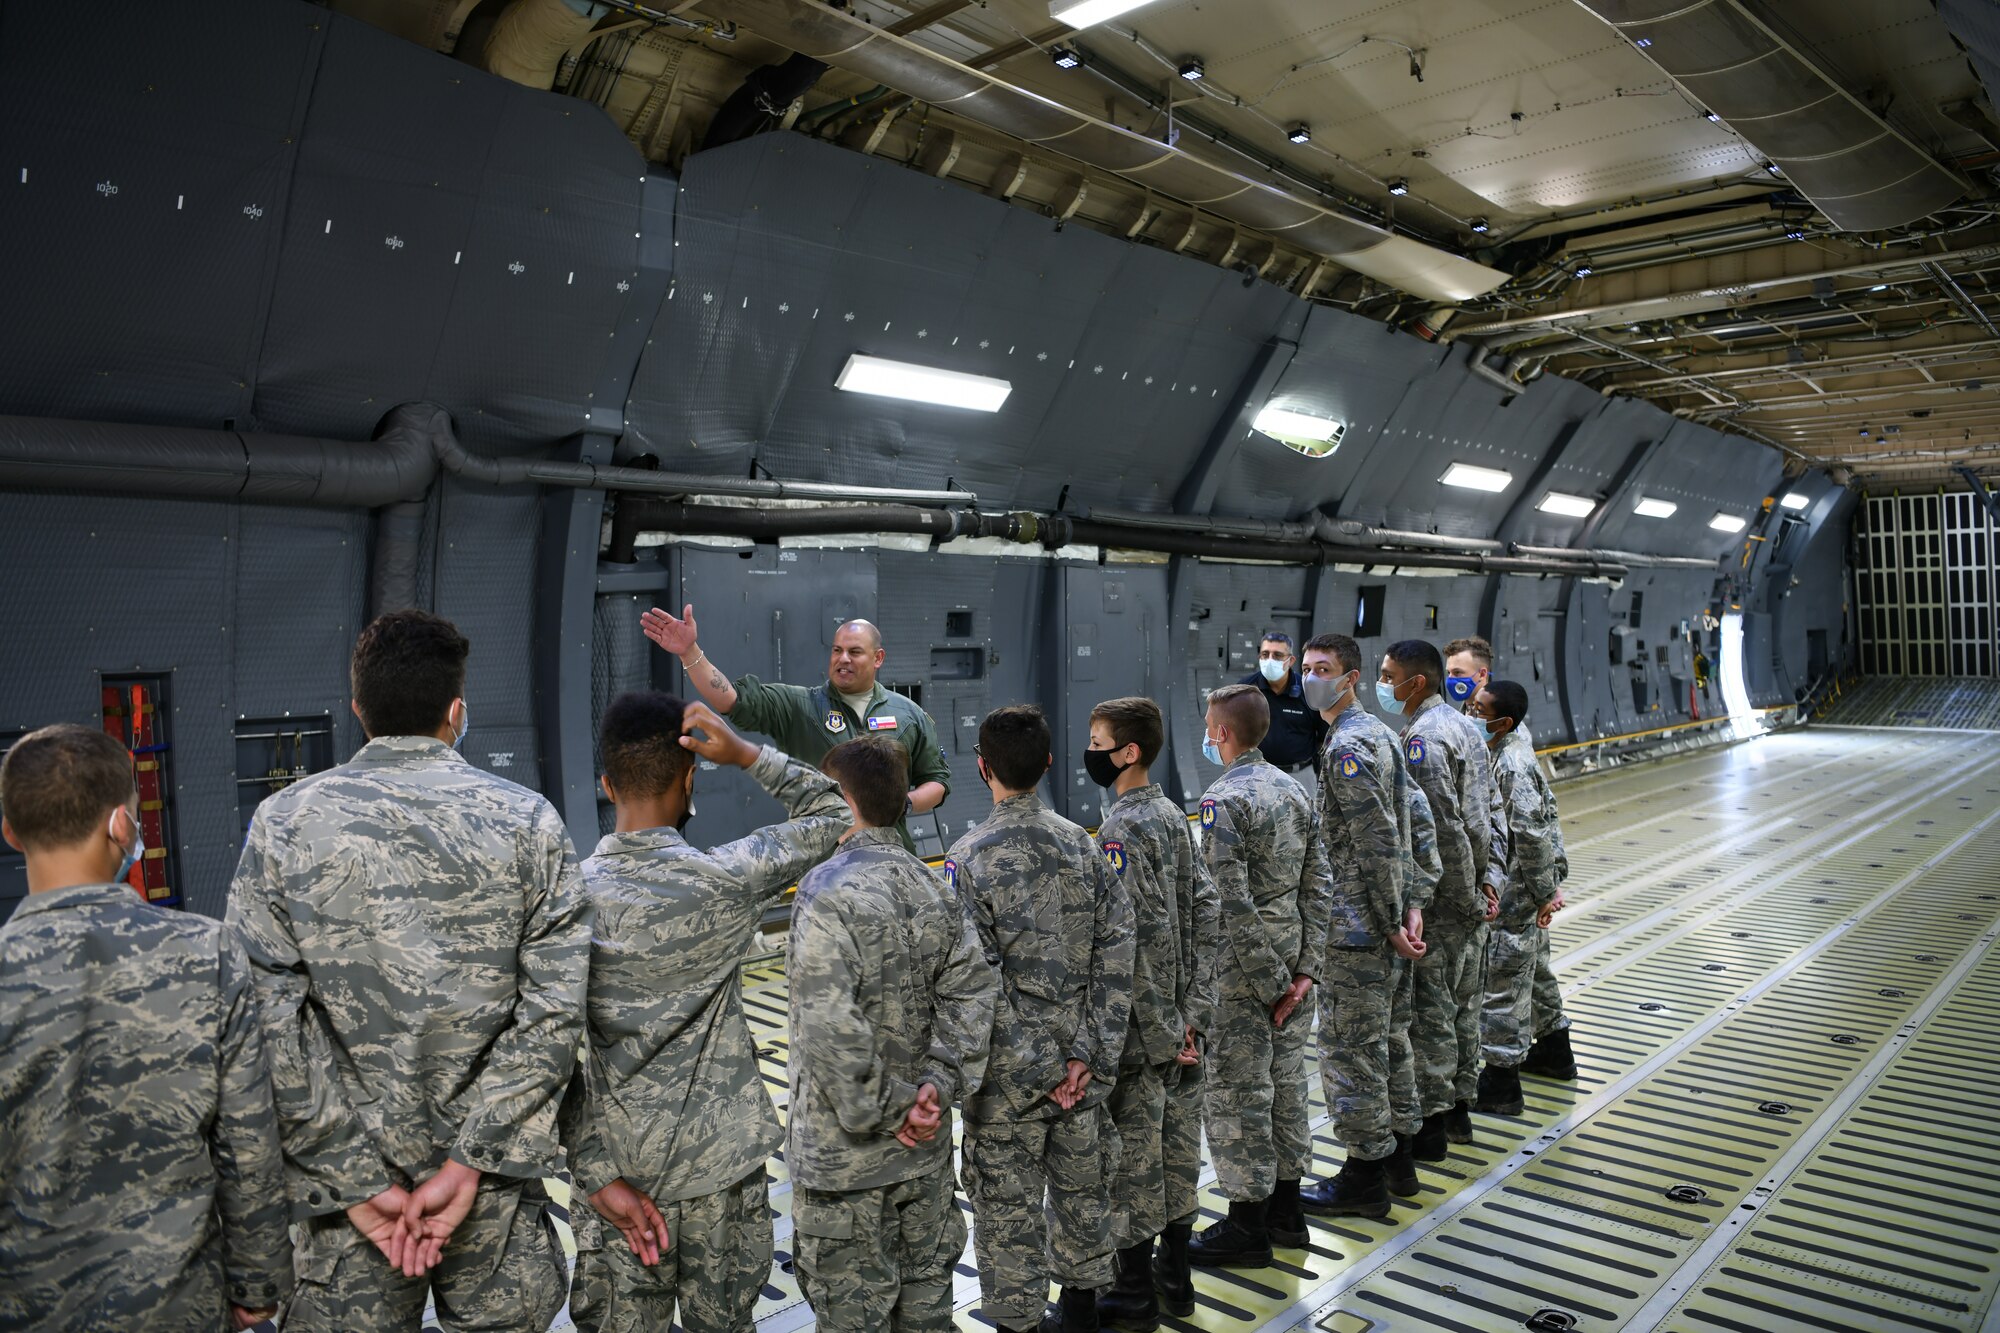 Master Sgt. Eric Mungia, 68th Airlift Squadron loadmaster, talks to Texas Wing Civil Air Patrol cadets about the C-5M Super Galaxy aircraft at Joint Base San Antonio-Lackland, Texas, July 8, 2021. This visit promoted awareness of U.S. Air Force Reserve career options for the Cadets. (U.S. Air Force photo by Master Sgt. Kristian Carter)